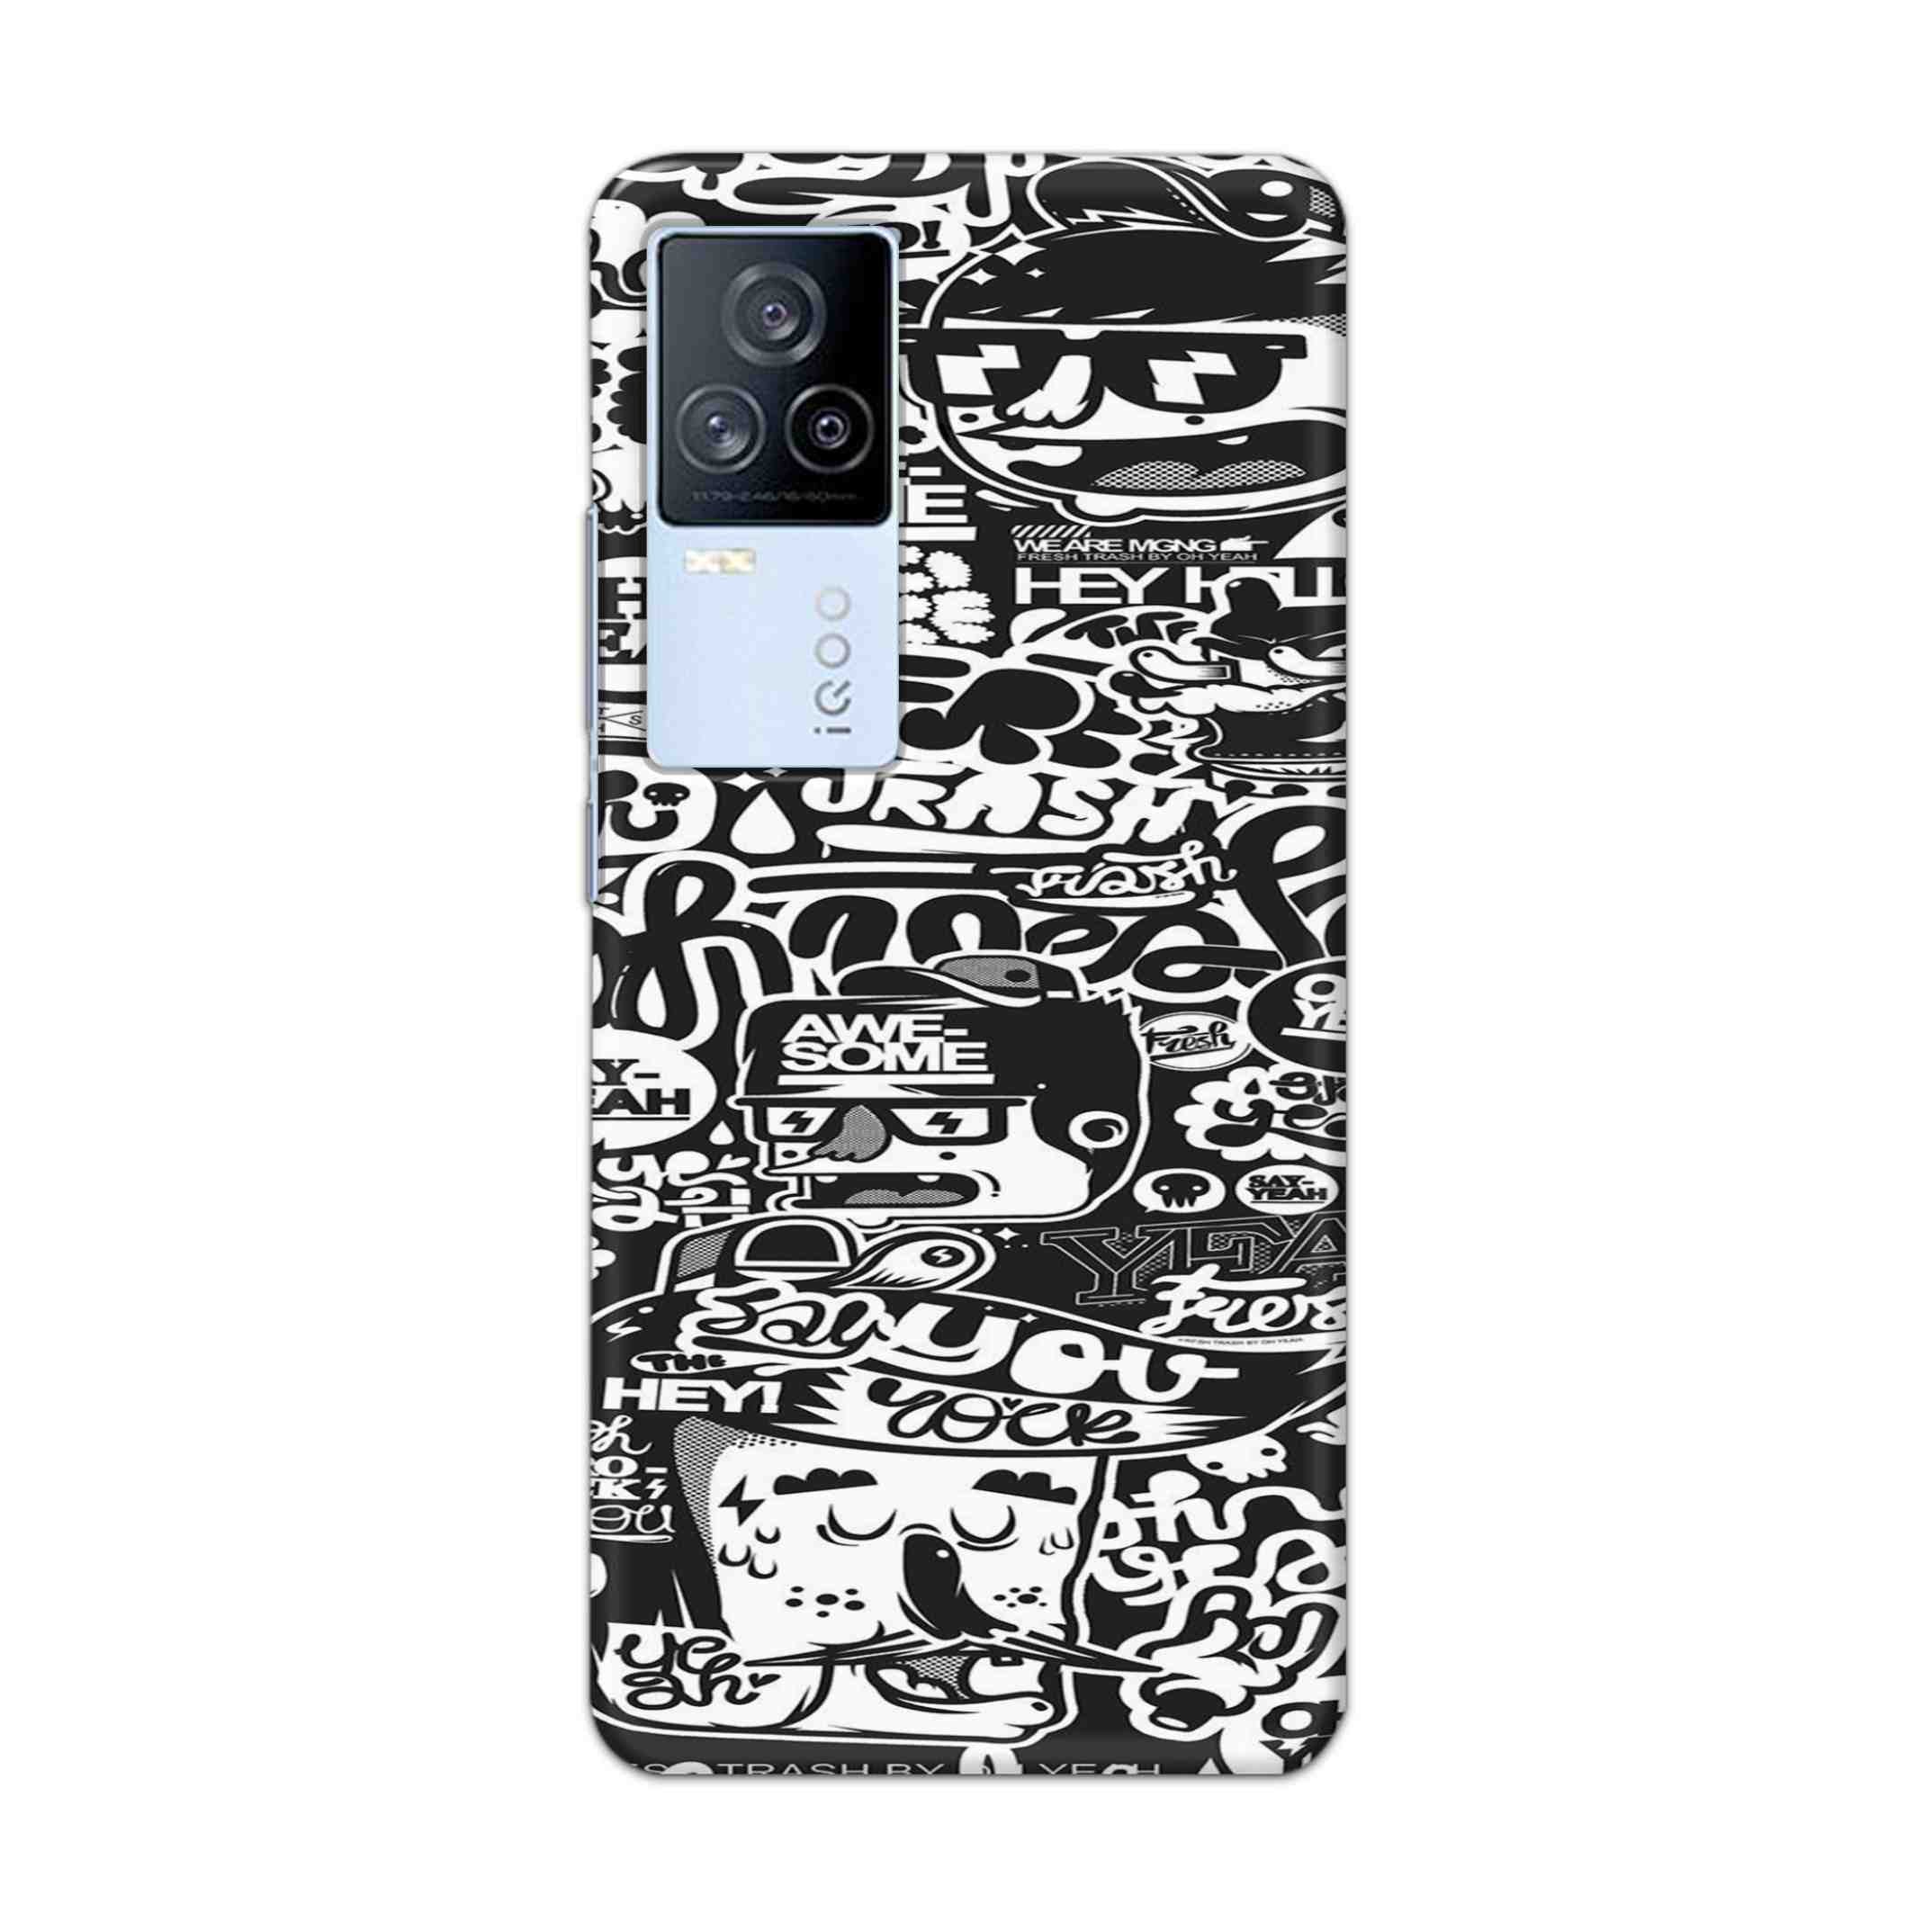 Buy Awesome Hard Back Mobile Phone Case/Cover For iQOO7 Online